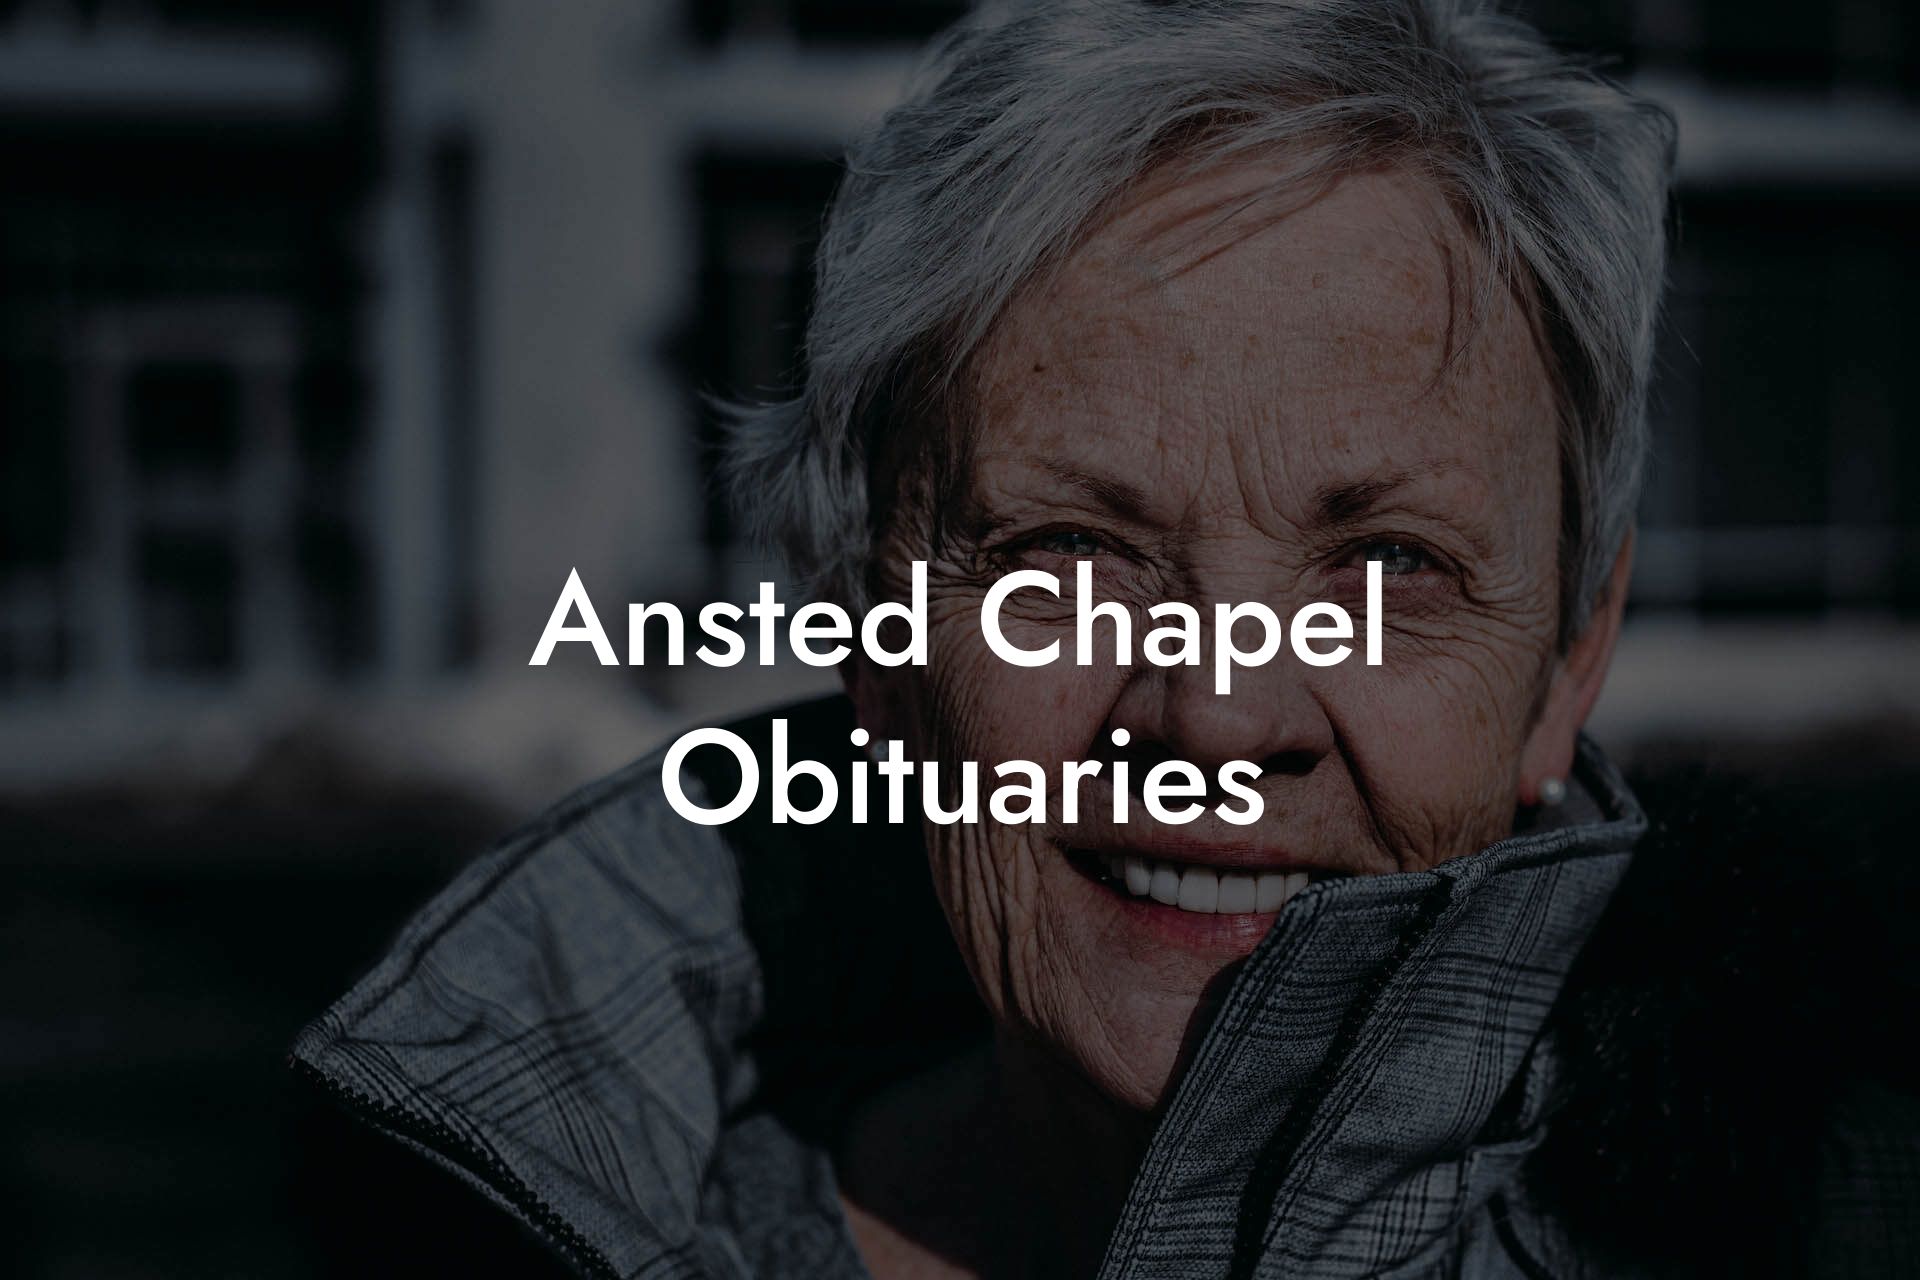 Ansted Chapel Obituaries